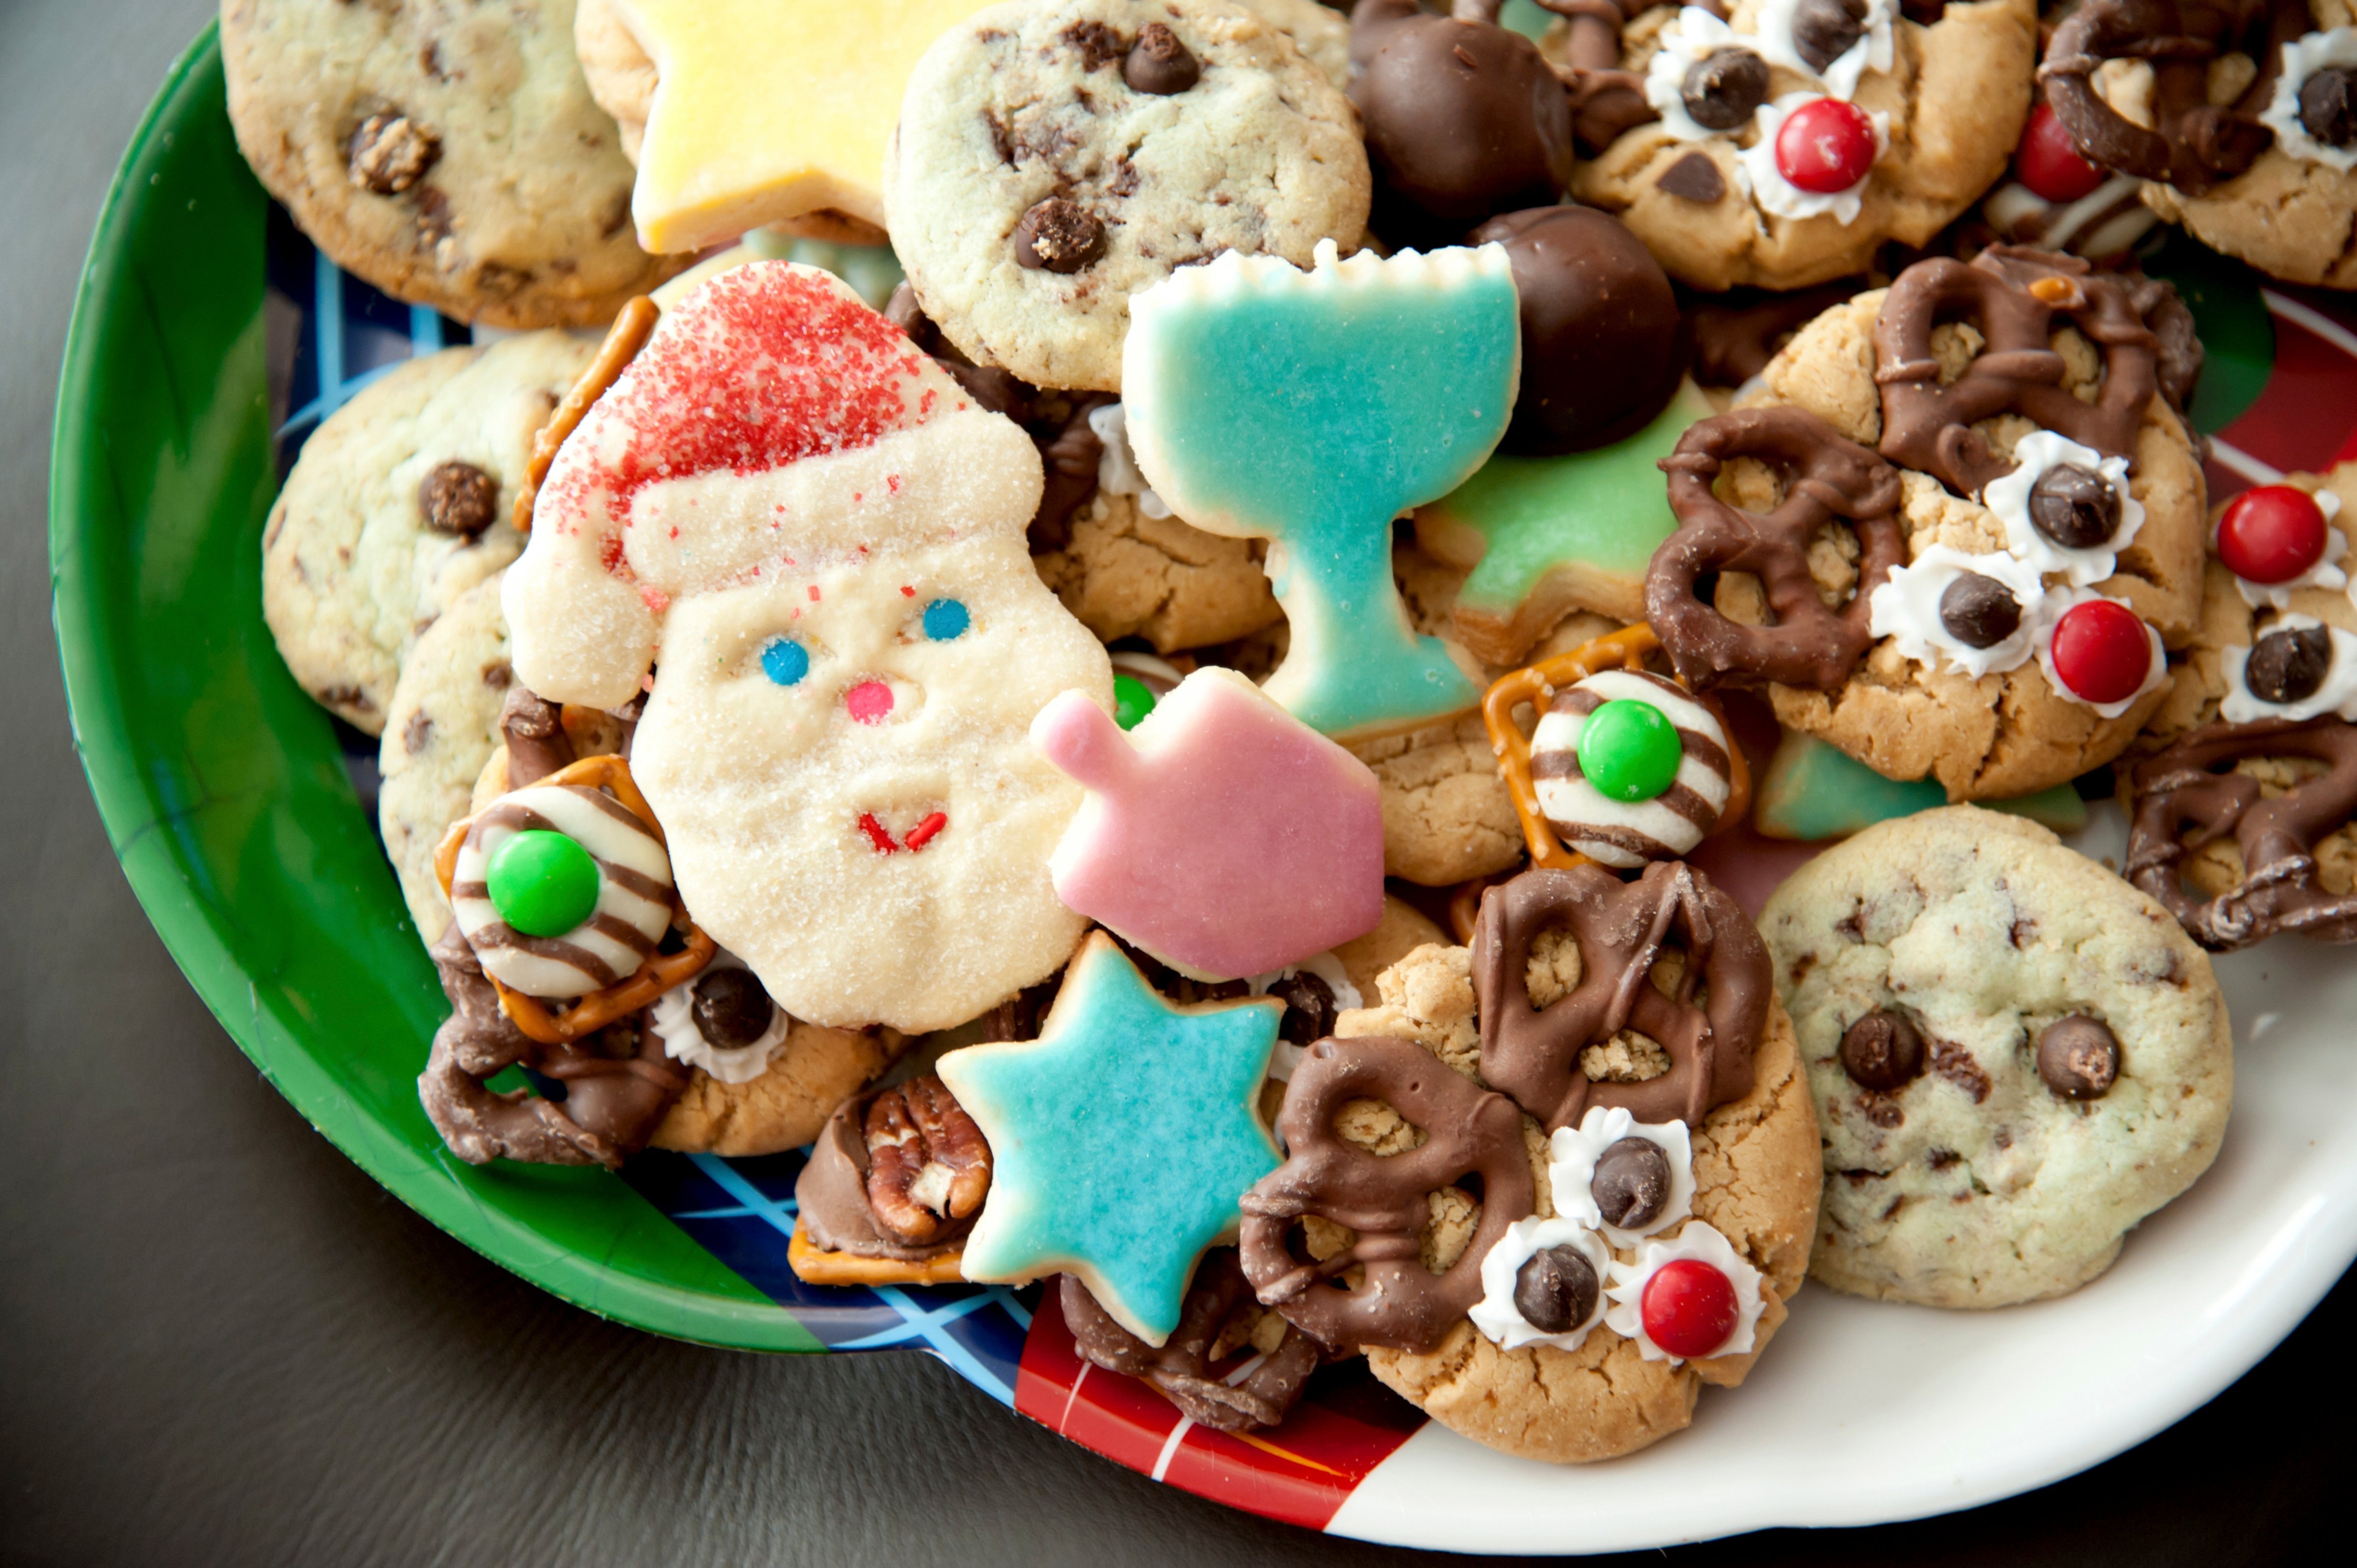 Plate of variety of holiday cookies